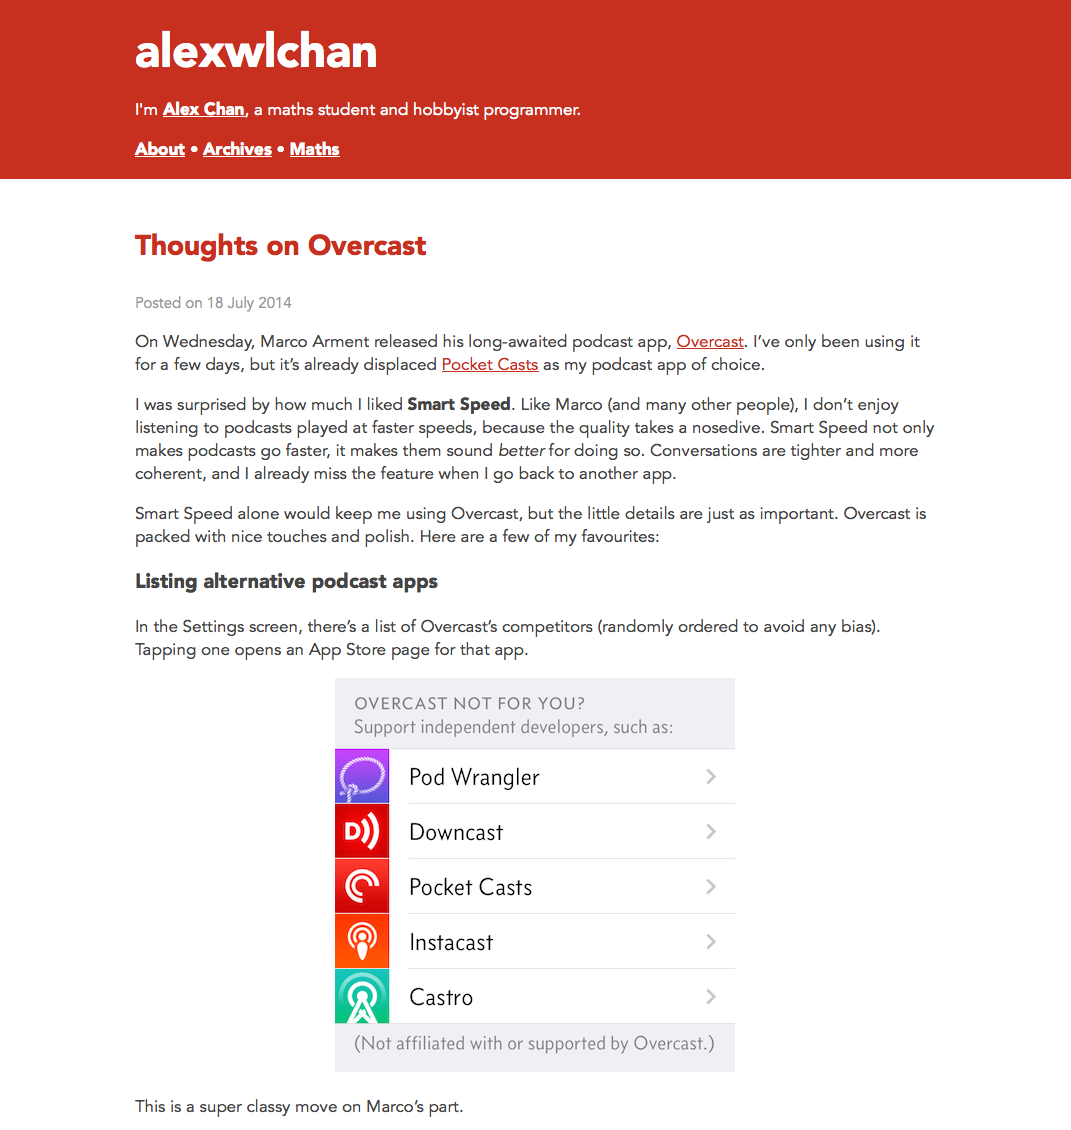 A tall reddish-orange strip with the name “alexwlchan” and a bio line, with an article below it.